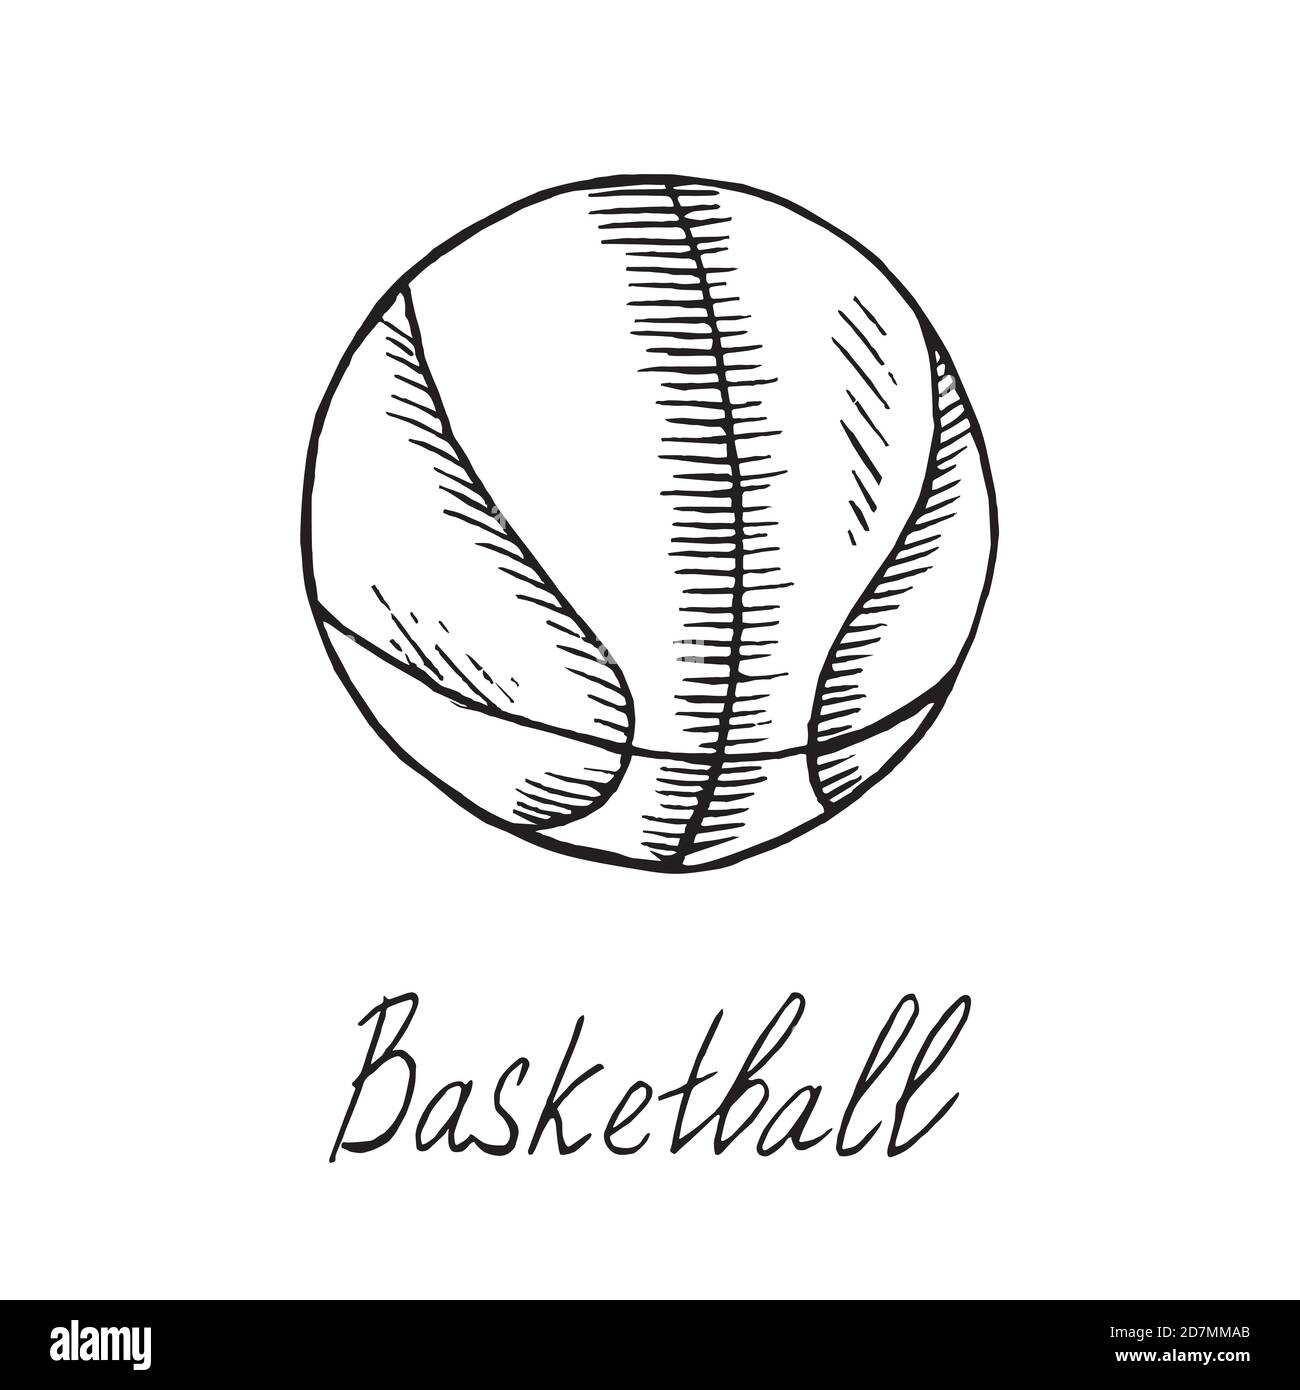 Basketball ball, hand drawn doodle sketch with inscription, isolated  outline illustration Stock Photo - Alamy